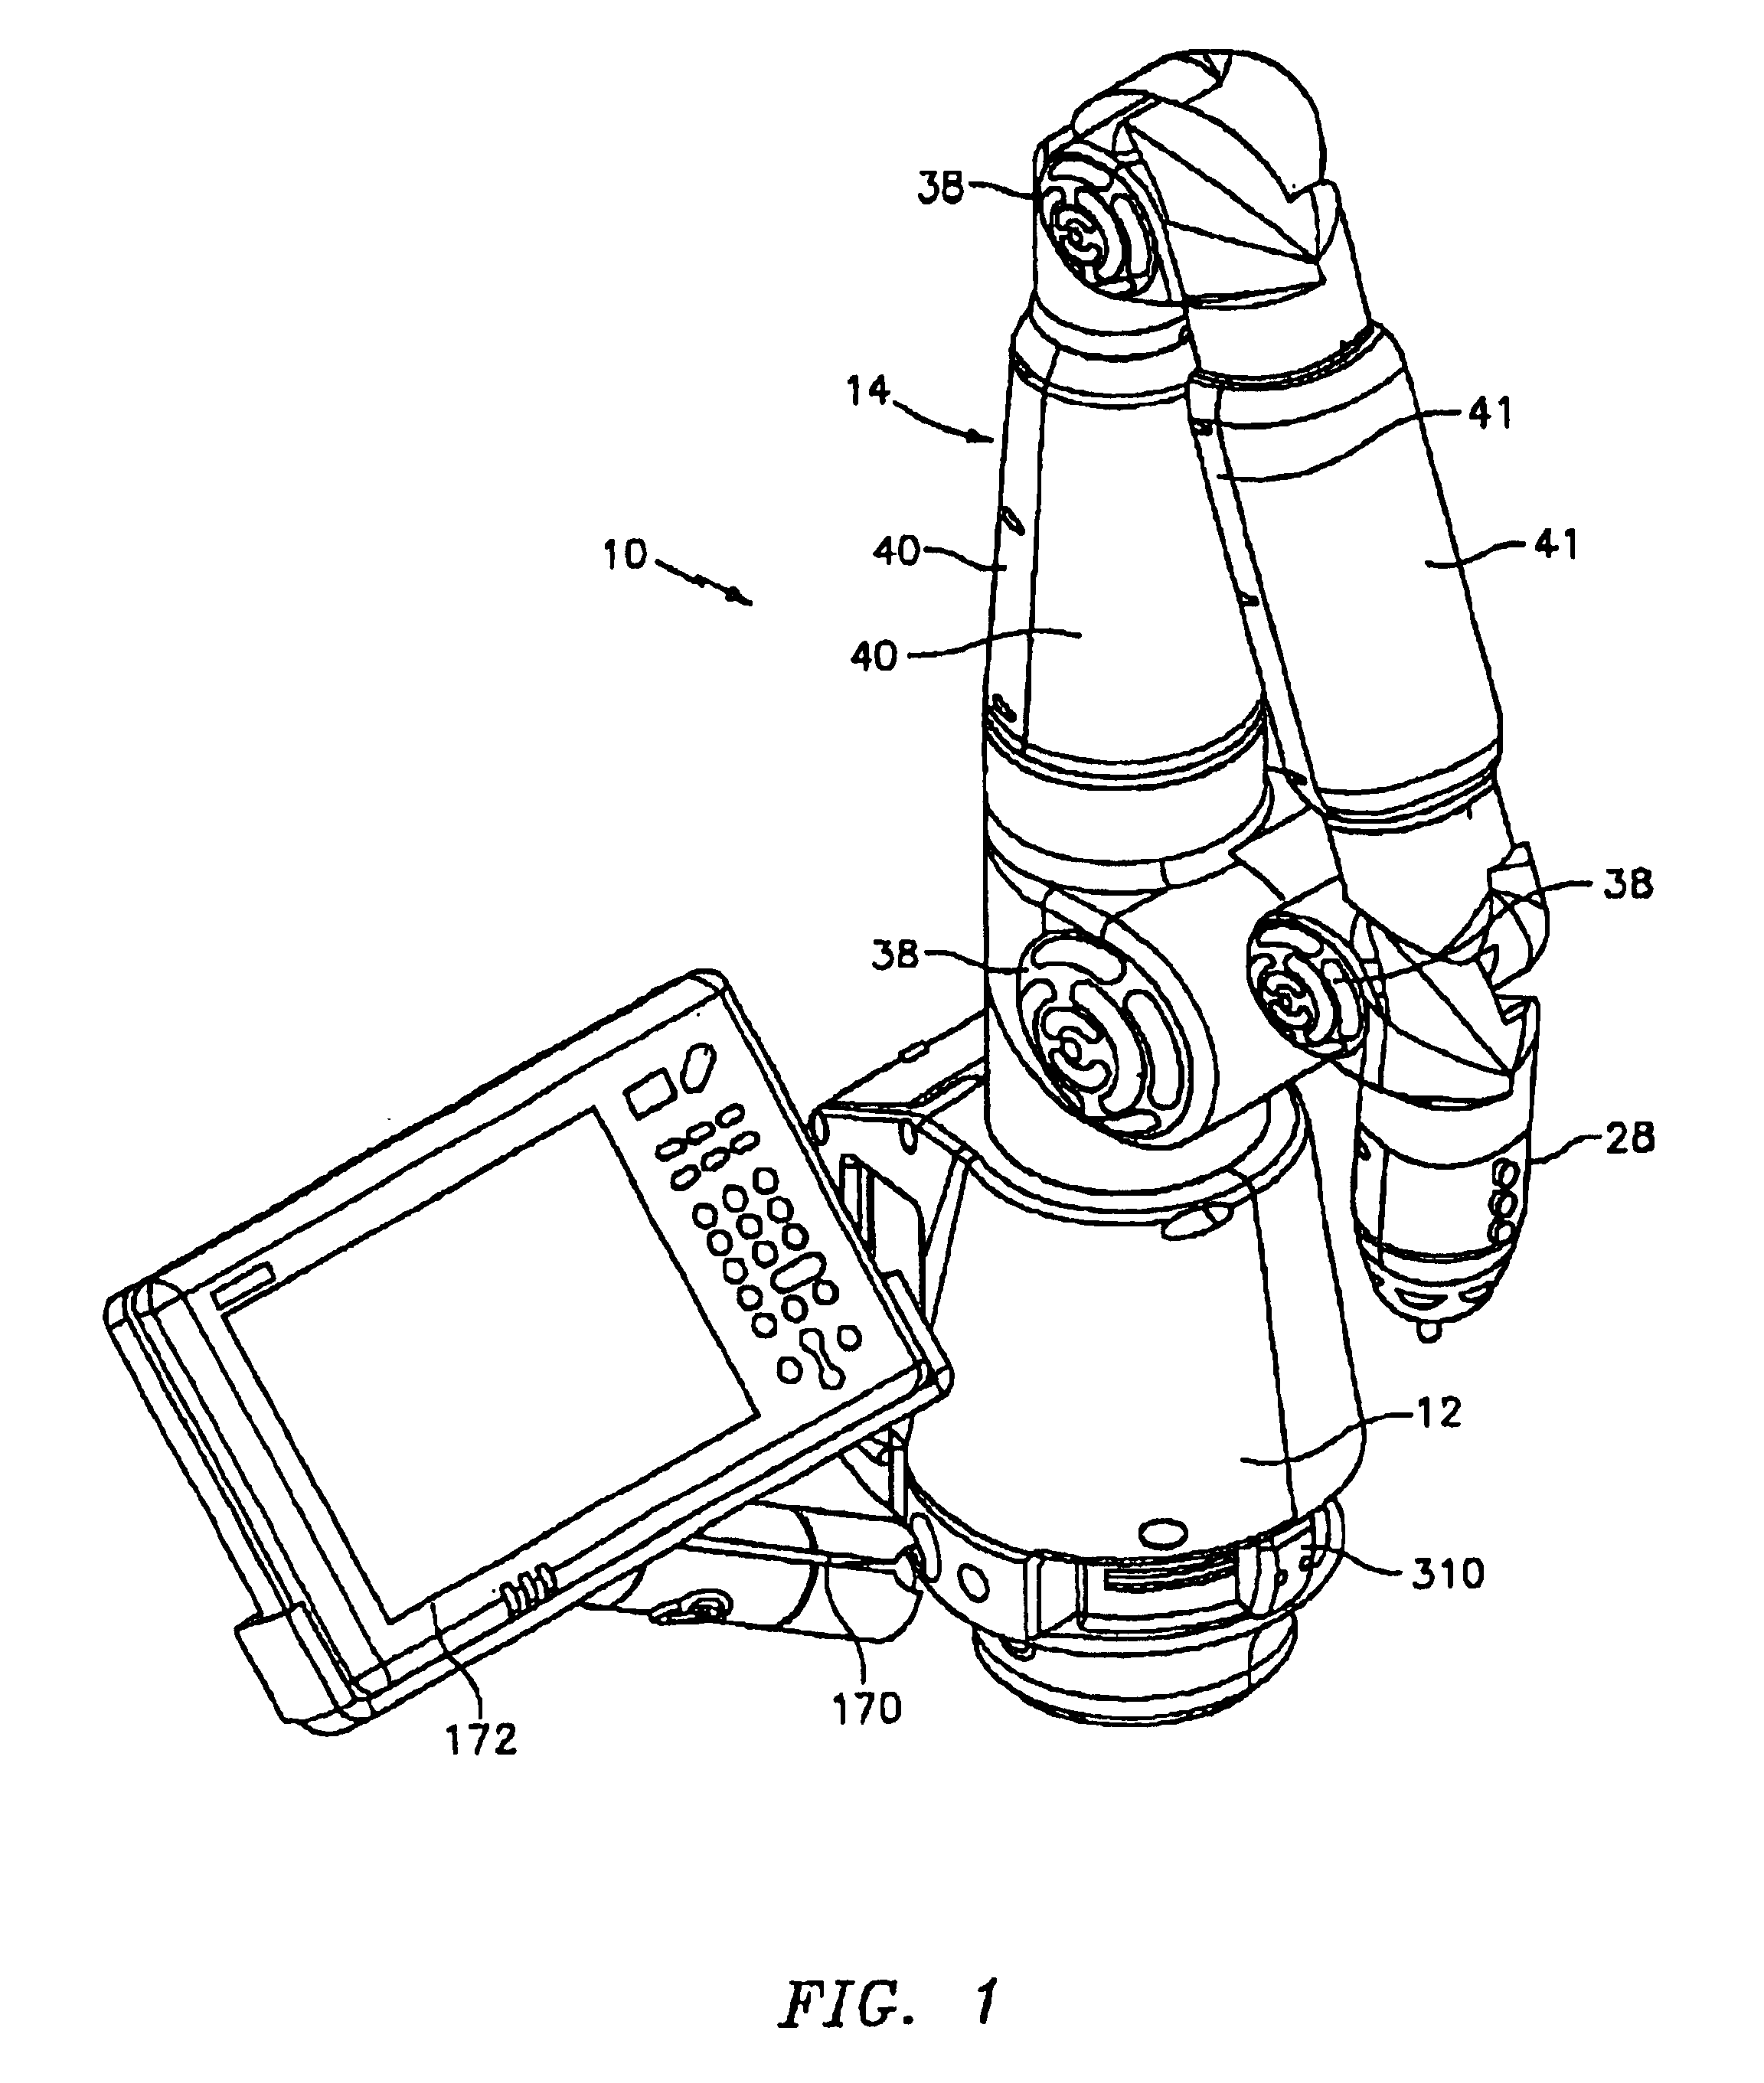 Method and apparatus for improving measurement accuracy of a portable coordinate measurement machine